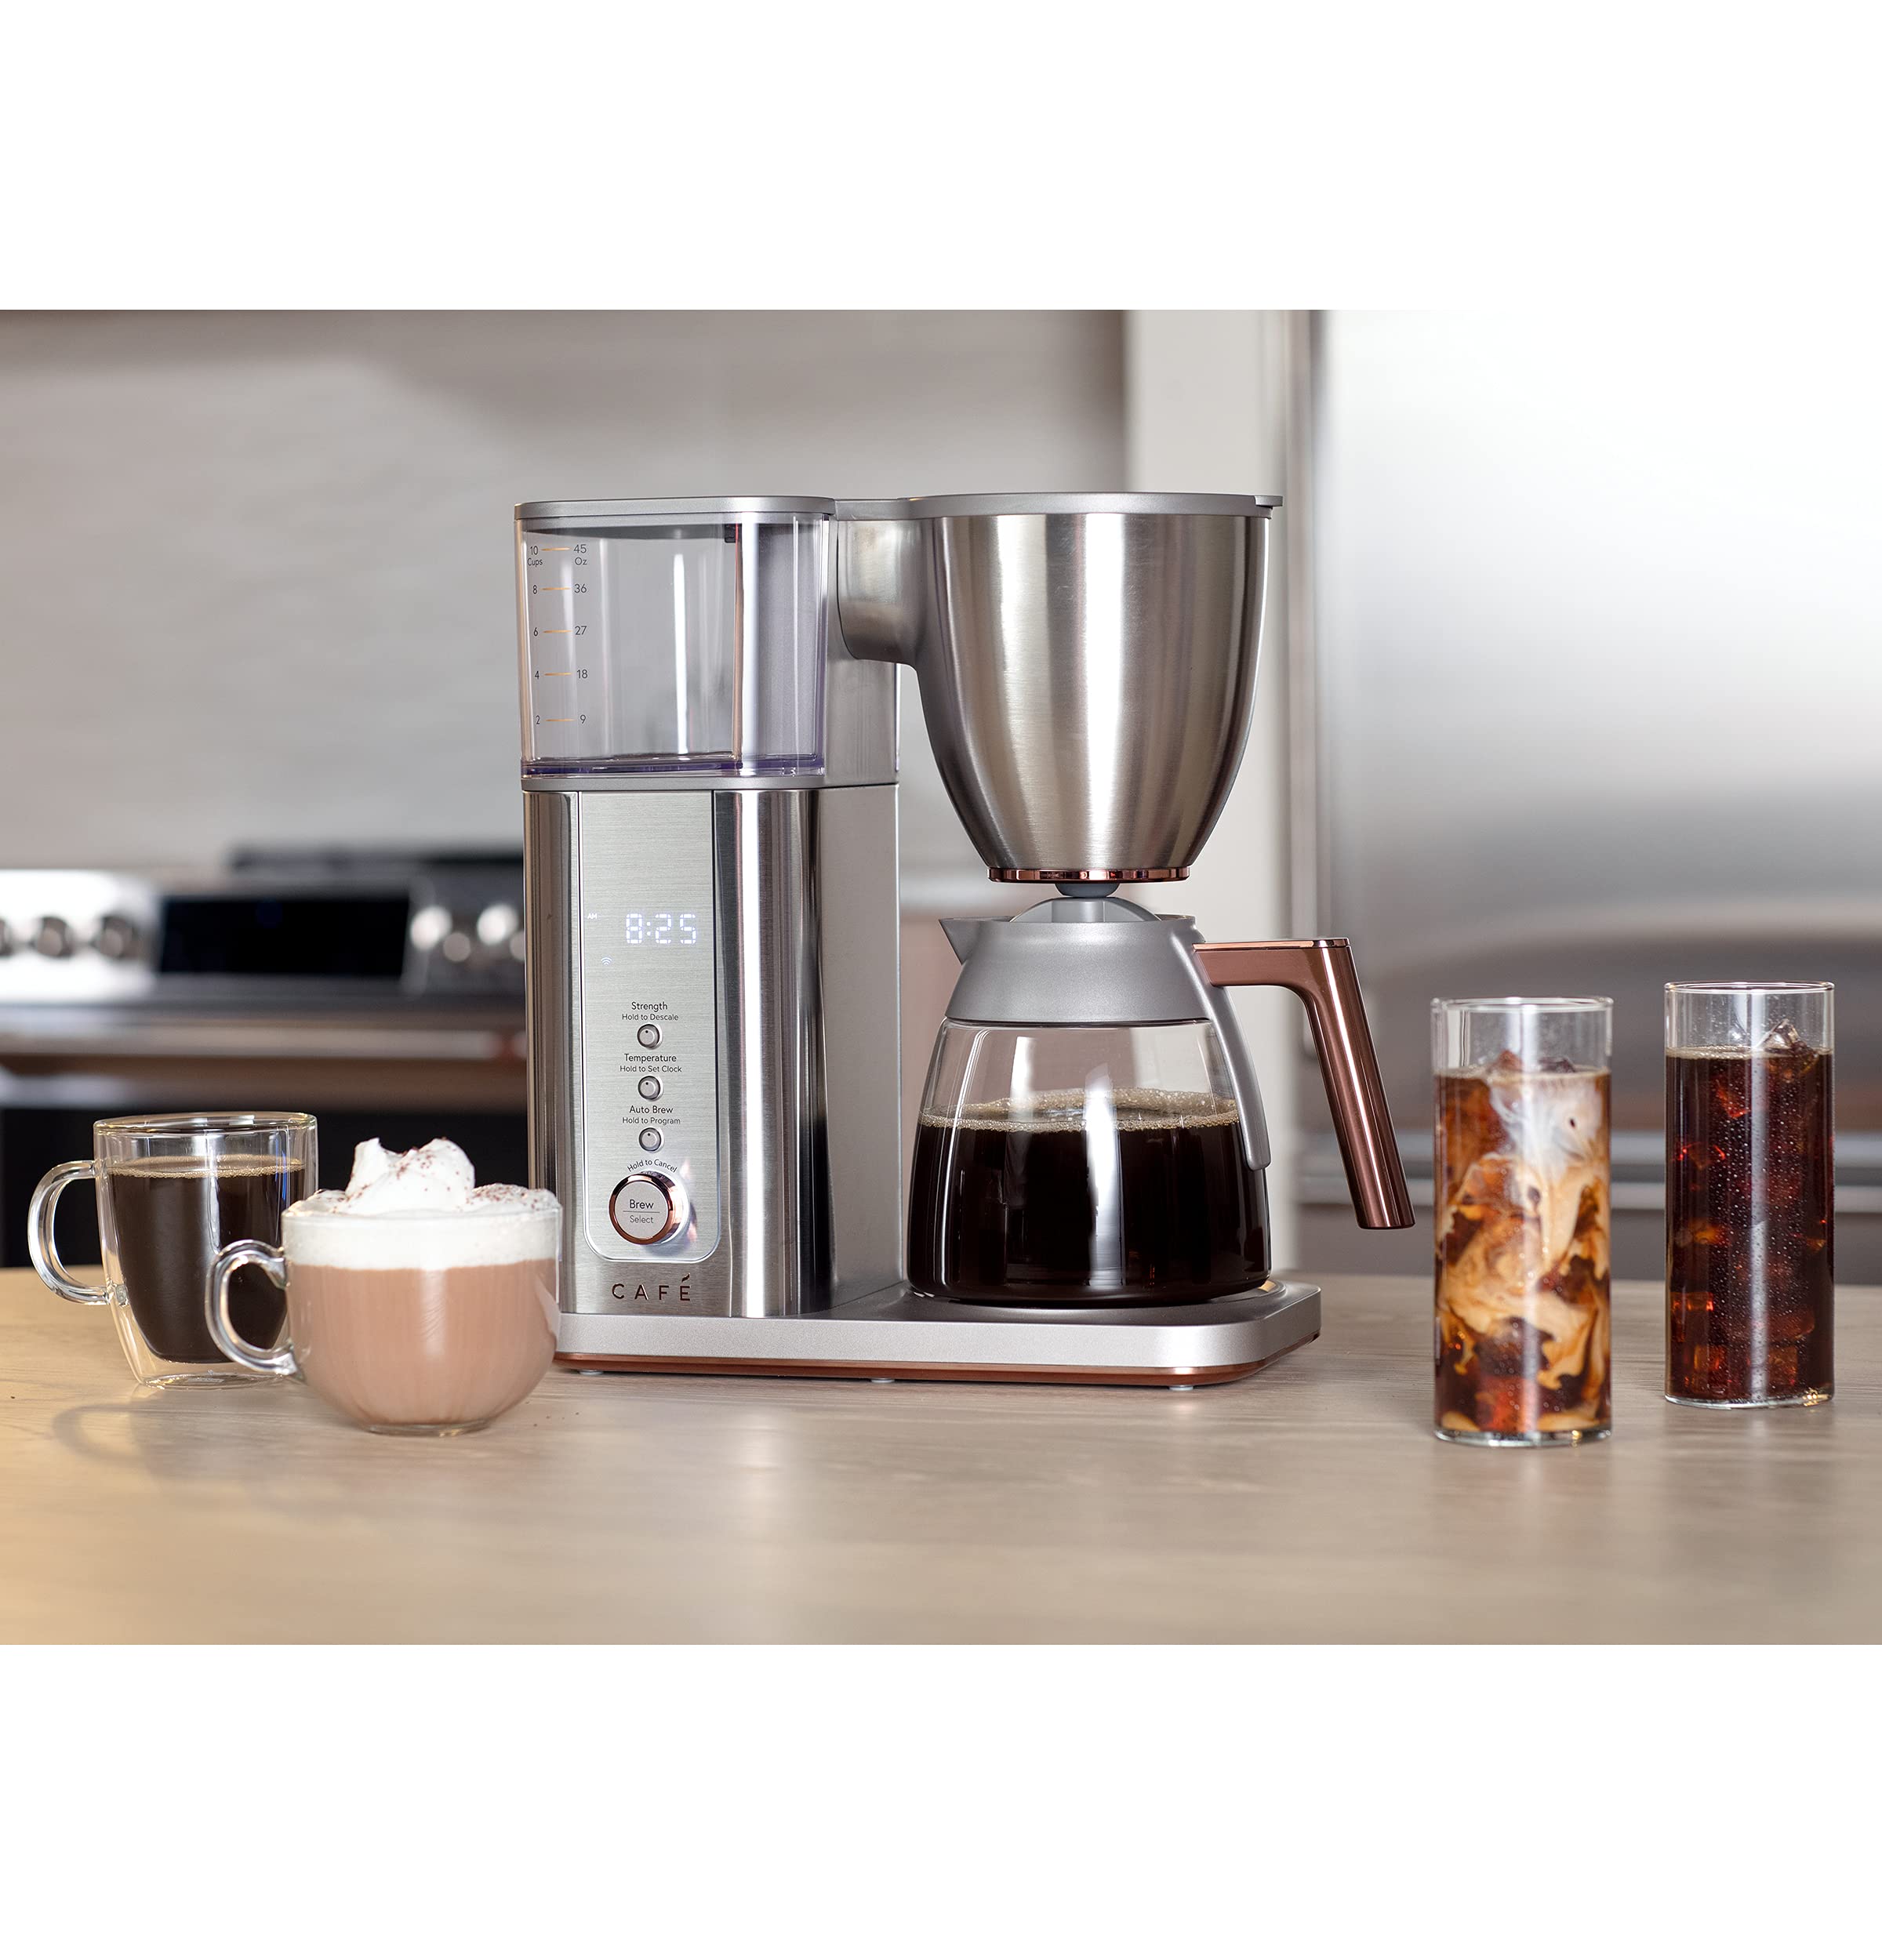 Café Specialty Drip Coffee Maker | 10-Cup Glass Carafe | WiFi Enabled Voice-to-Brew Technology | Smart Home Kitchen Essentials | SCA Certified, Barista-Quality Brew | Stainless Steel